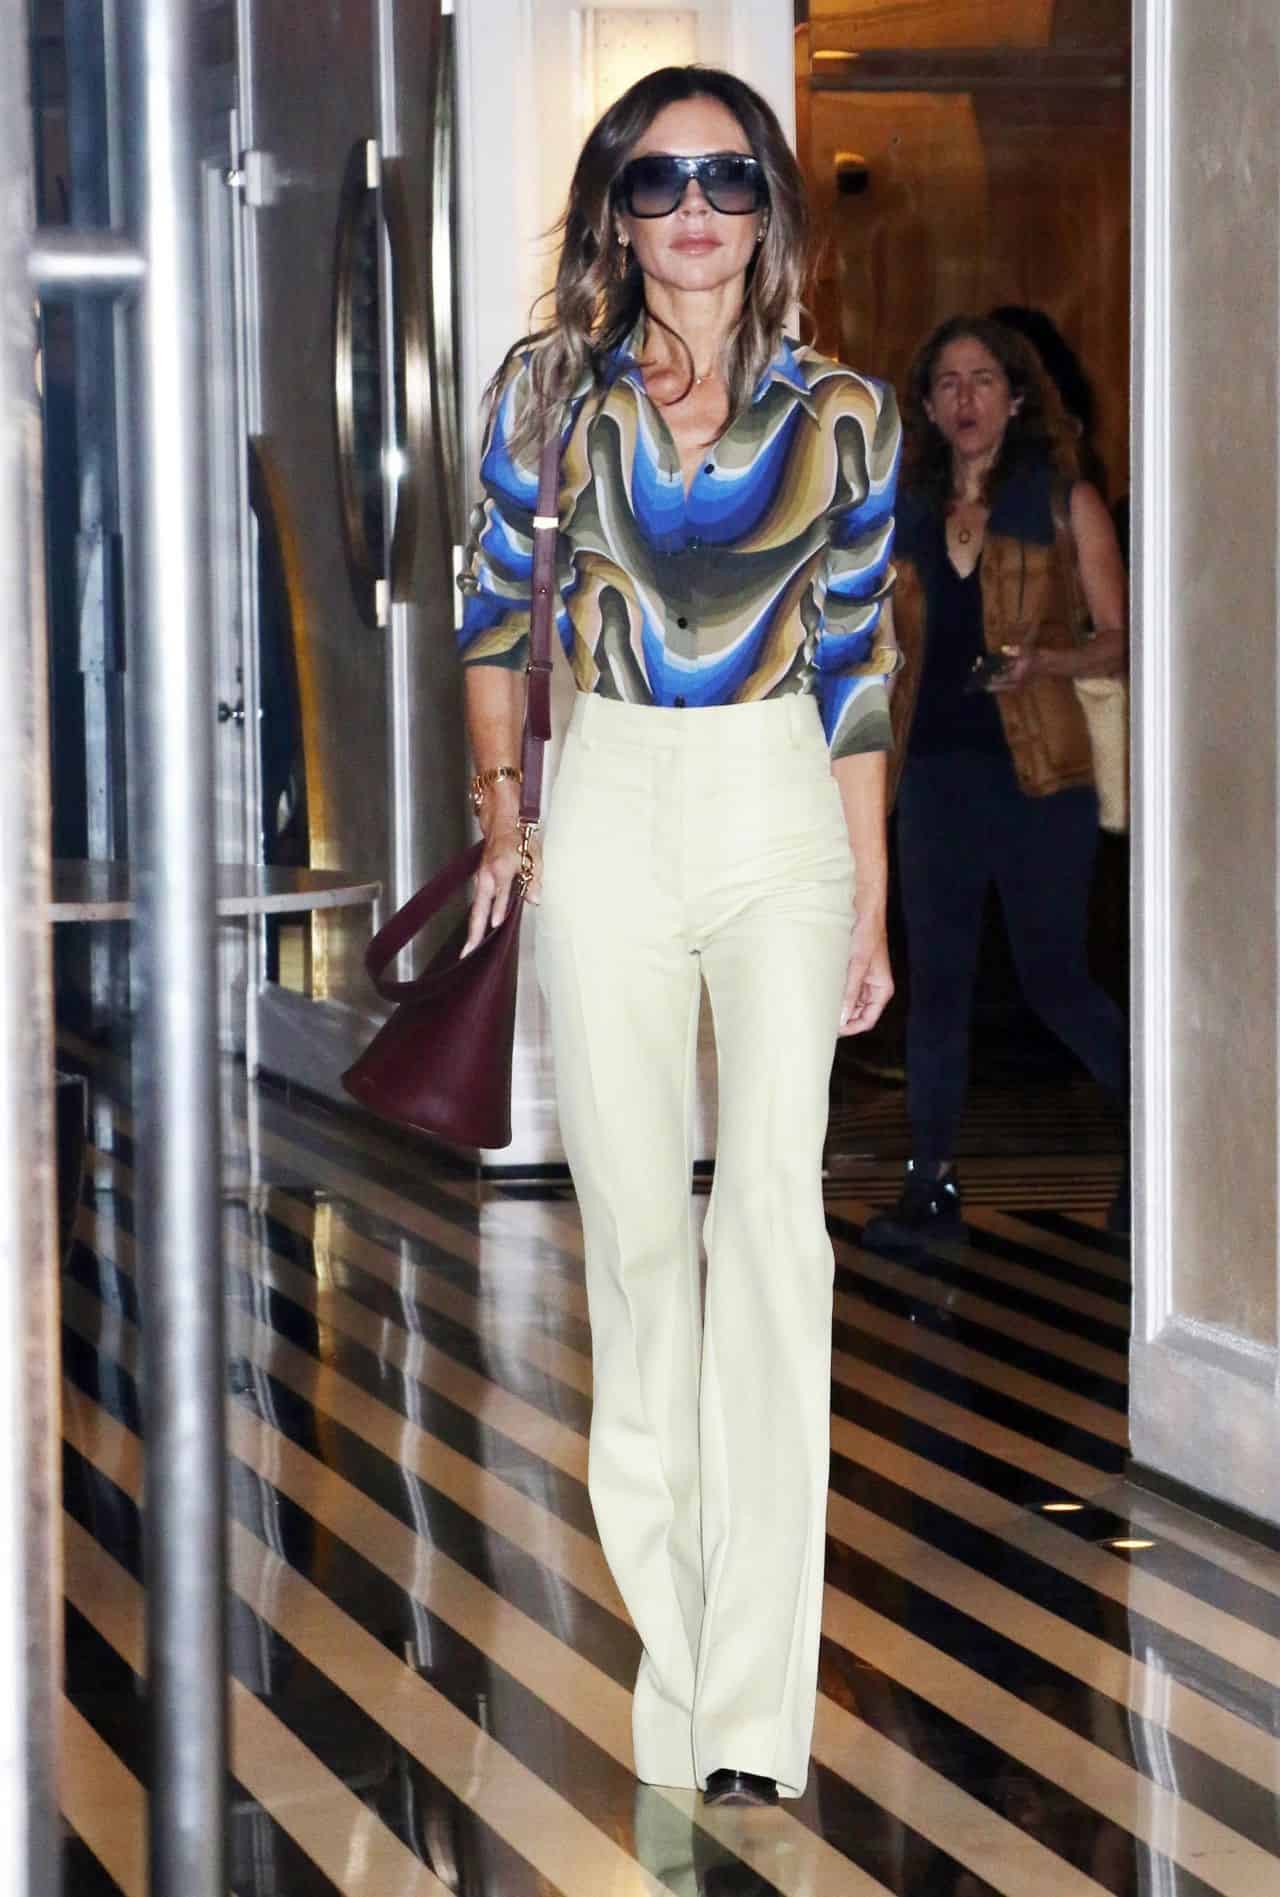 Victoria Beckham Oozes 70s Chic in a Colorful Shirt and Cream Pants in NY